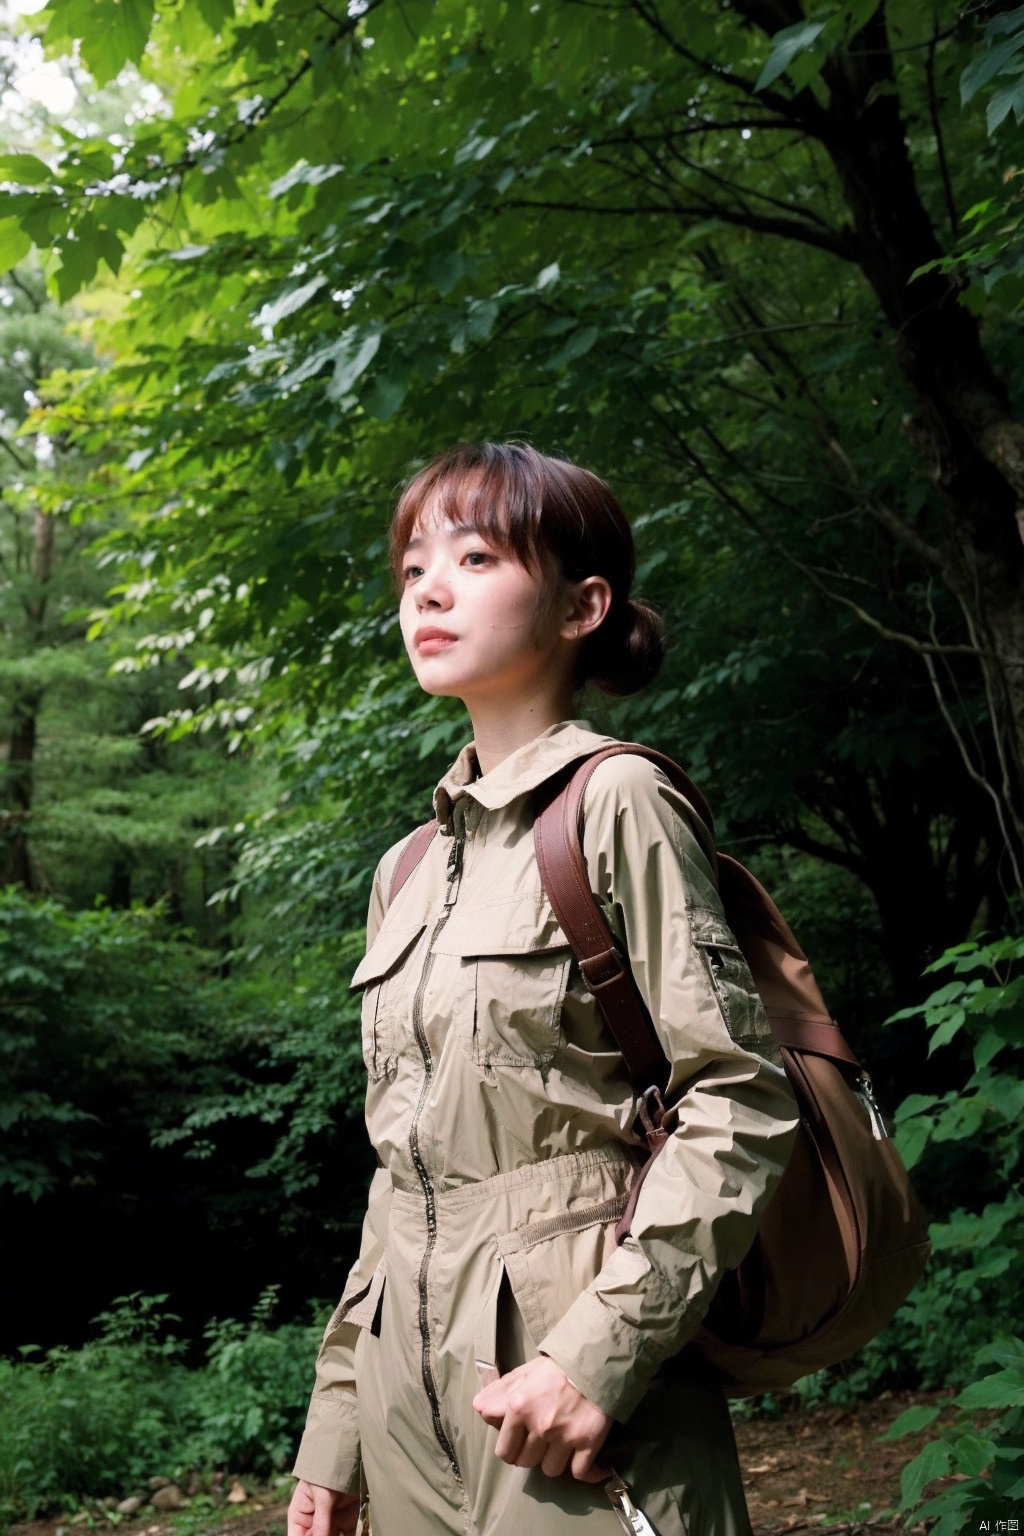 A striking young woman stands amidst a verdant forest clearing, bathed in the soft glow of dappled sunlight filtering through the dense canopy. She wears an earthy-toned utility jacket and fitted cargo pants, hinting at her readiness for adventure. Her hair is tied back in a practical bun, showing off her strong jawline and determined eyes that scan the wilderness with quiet confidence.

She clutches a rugged backpack slung over one shoulder, suggesting she's well-prepared for the trails ahead. The forest backdrop serves as a metaphorical mirror to her resilient spirit, its towering trees standing tall like silent sentinels around her. The scene echoes the empowering solitude found in the natural world, akin to the work of landscape photographers who capture human interaction with nature.

Render this image in high-resolution with crisp details, emphasizing the interplay between light and shadow to highlight her form against the lush foliage. This portrait encapsulates the essence of a modern-day explorer, blending seamlessly into the raw beauty of the forest while radiating an unyielding sense of self-reliance and inner strength.